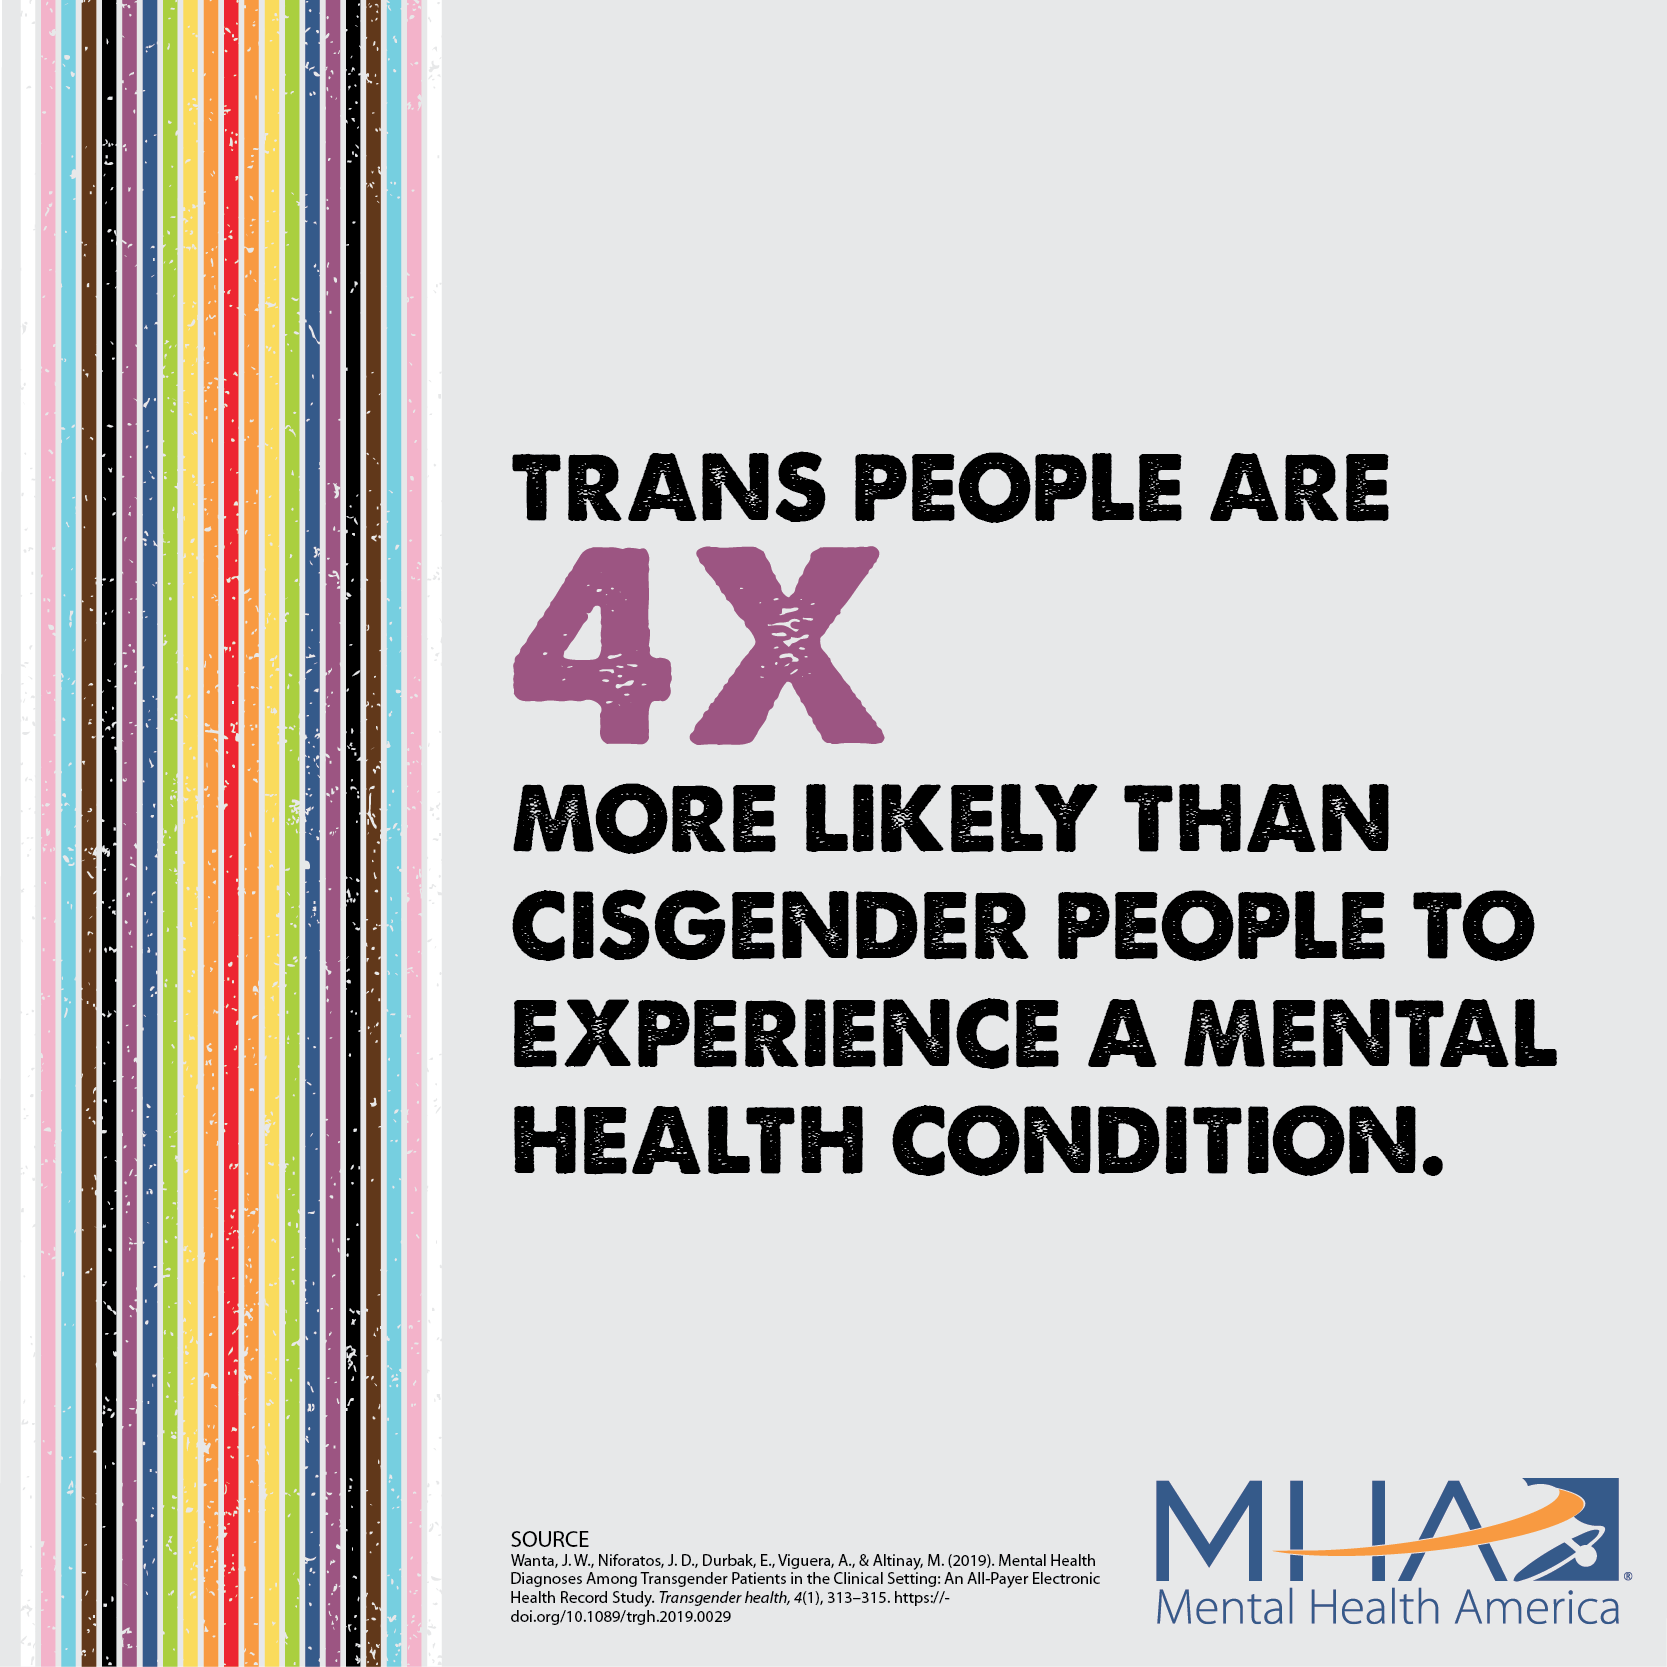 Trans people are 4X more likely than cisgender people to experience a mental health condition.